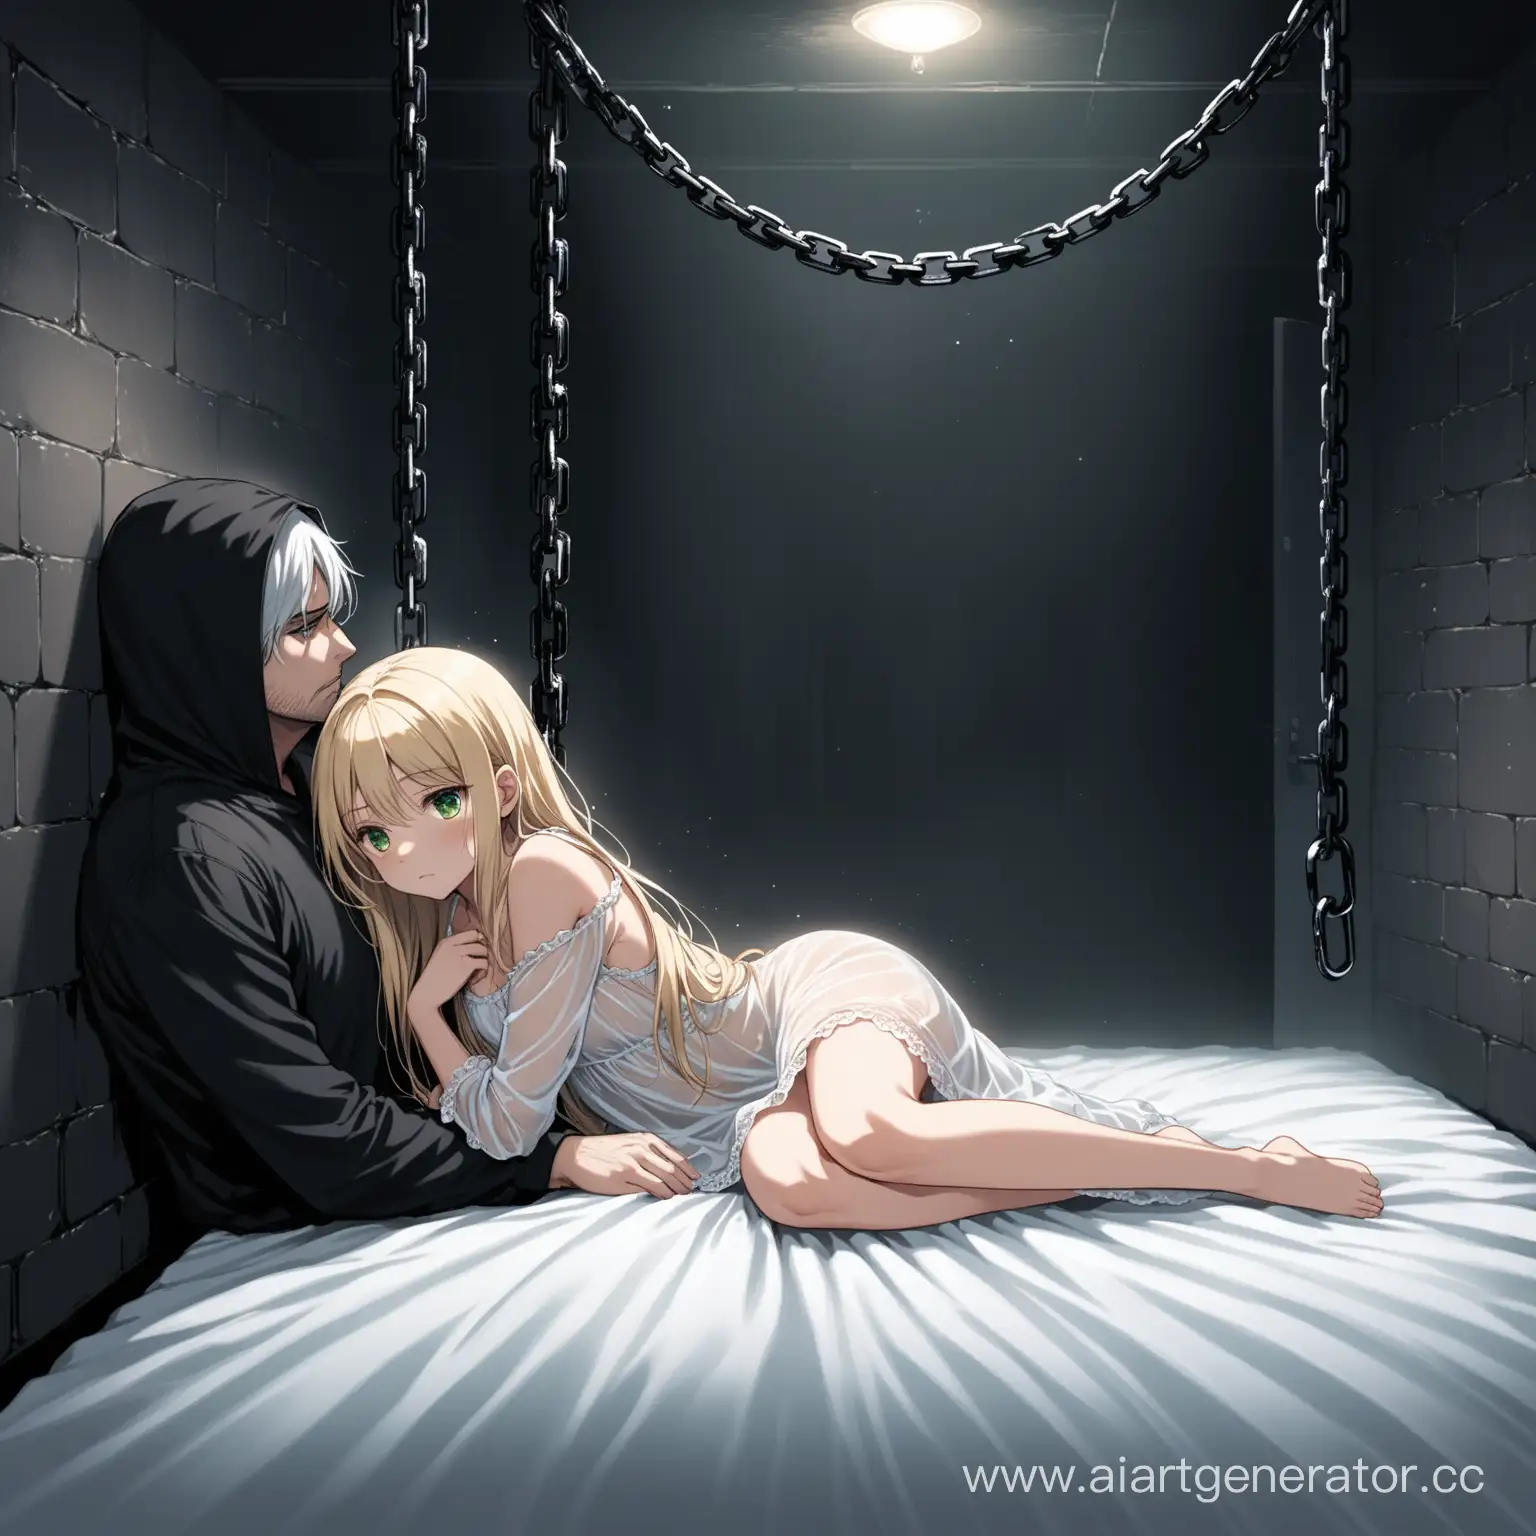 Captivating-Blonde-Girl-Chained-in-Basement-with-Mysterious-Figure